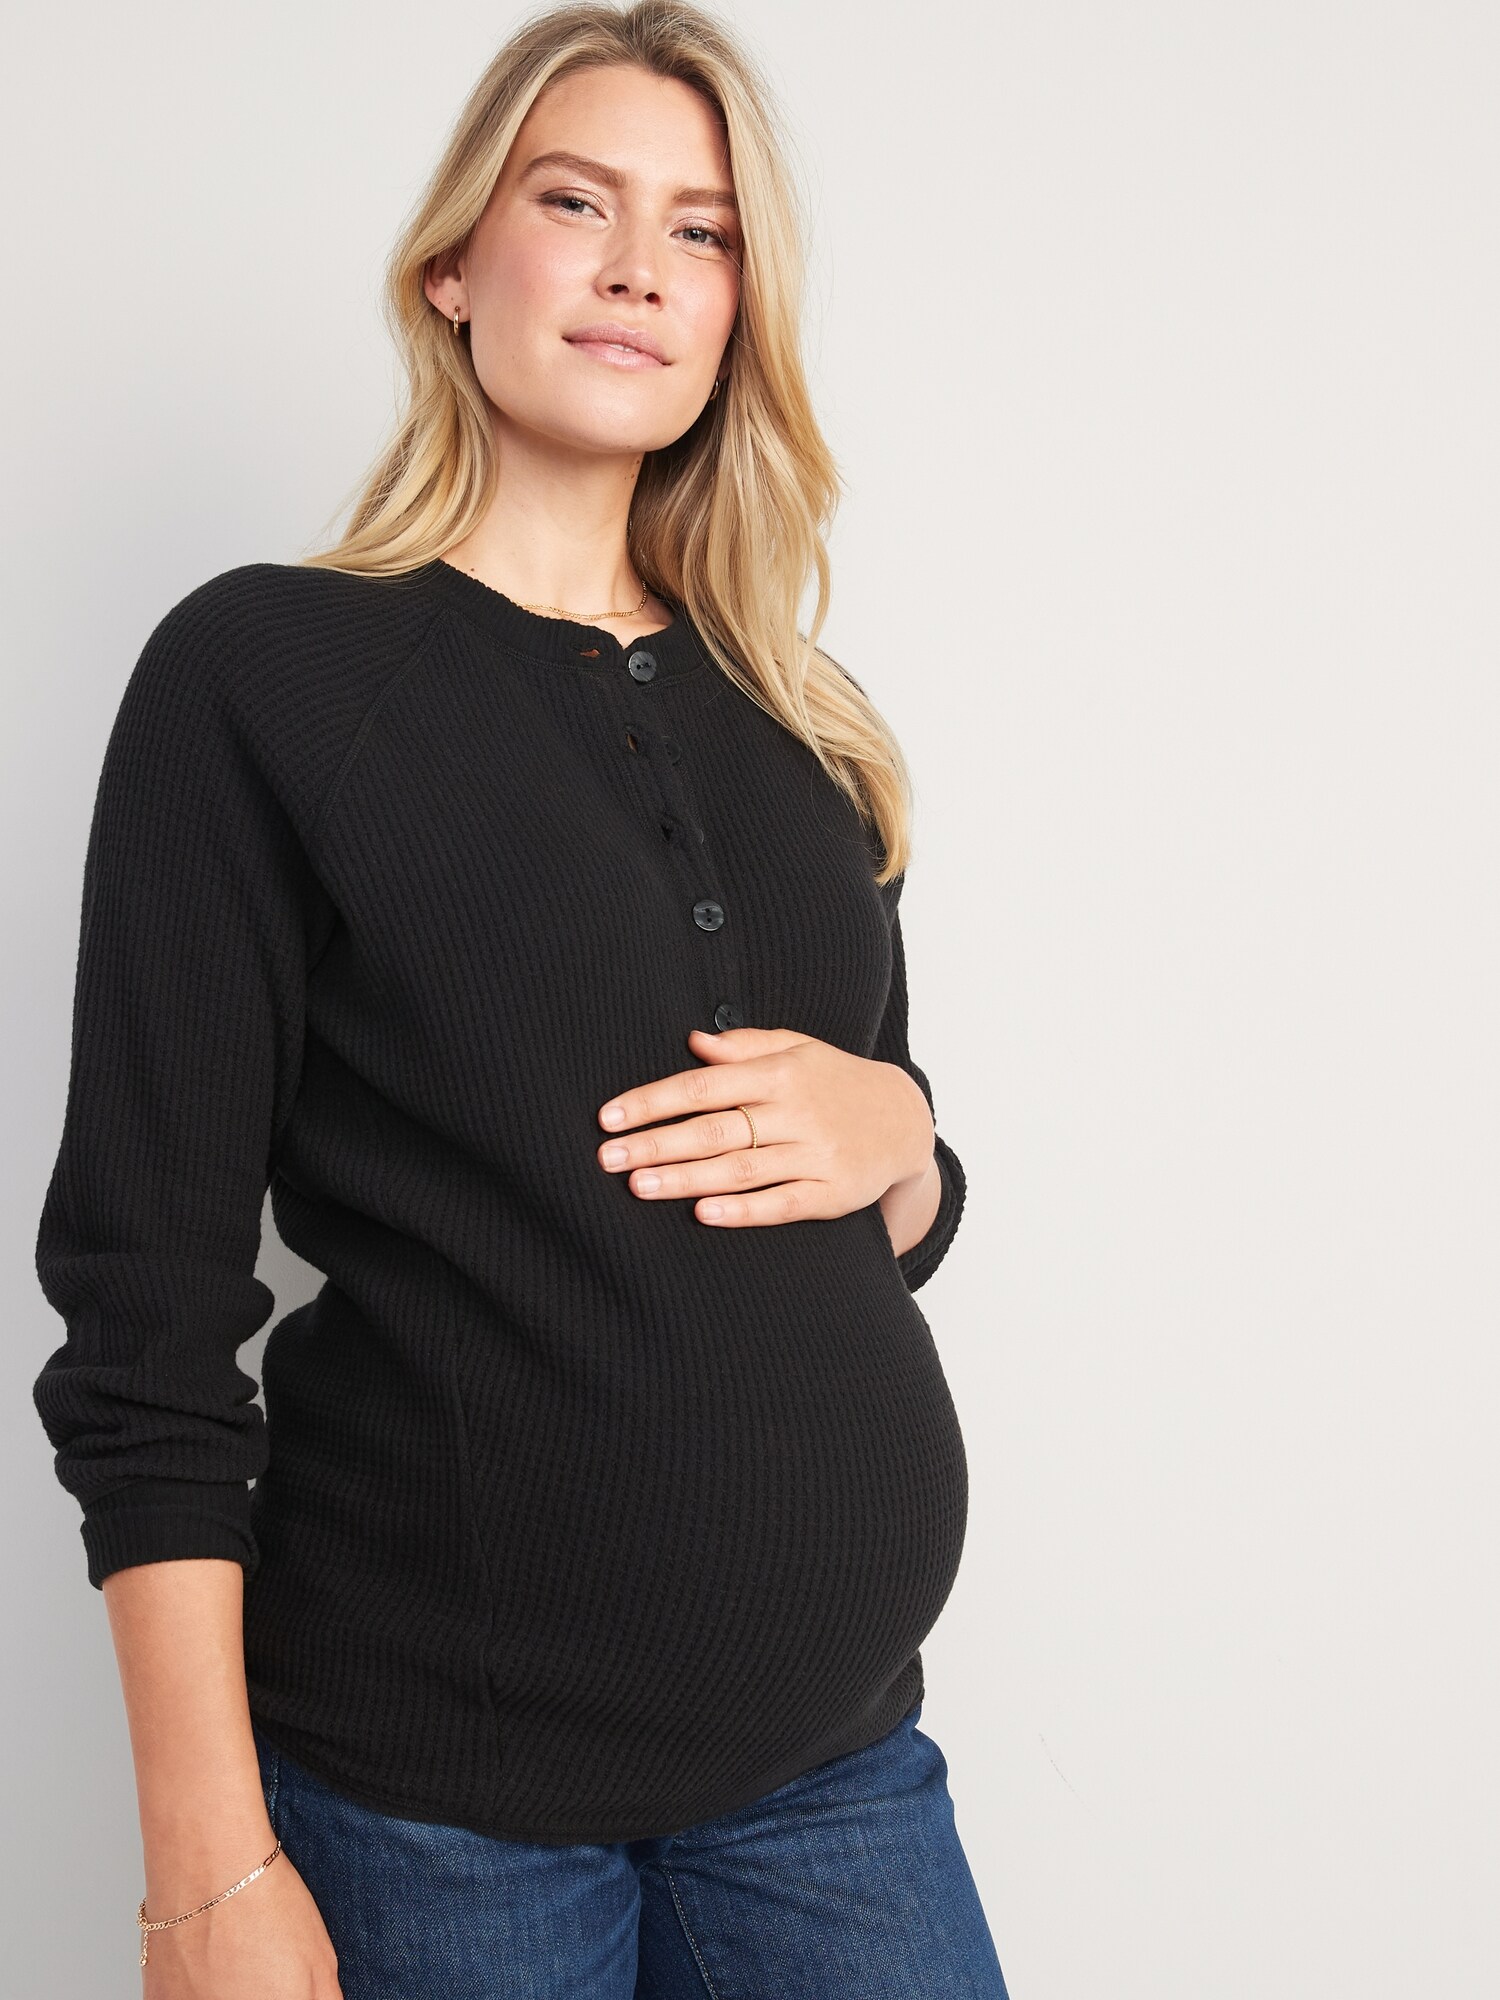 Maternity Thermal-Knit Long-Sleeve Henley Tunic Top for Women | Old Navy